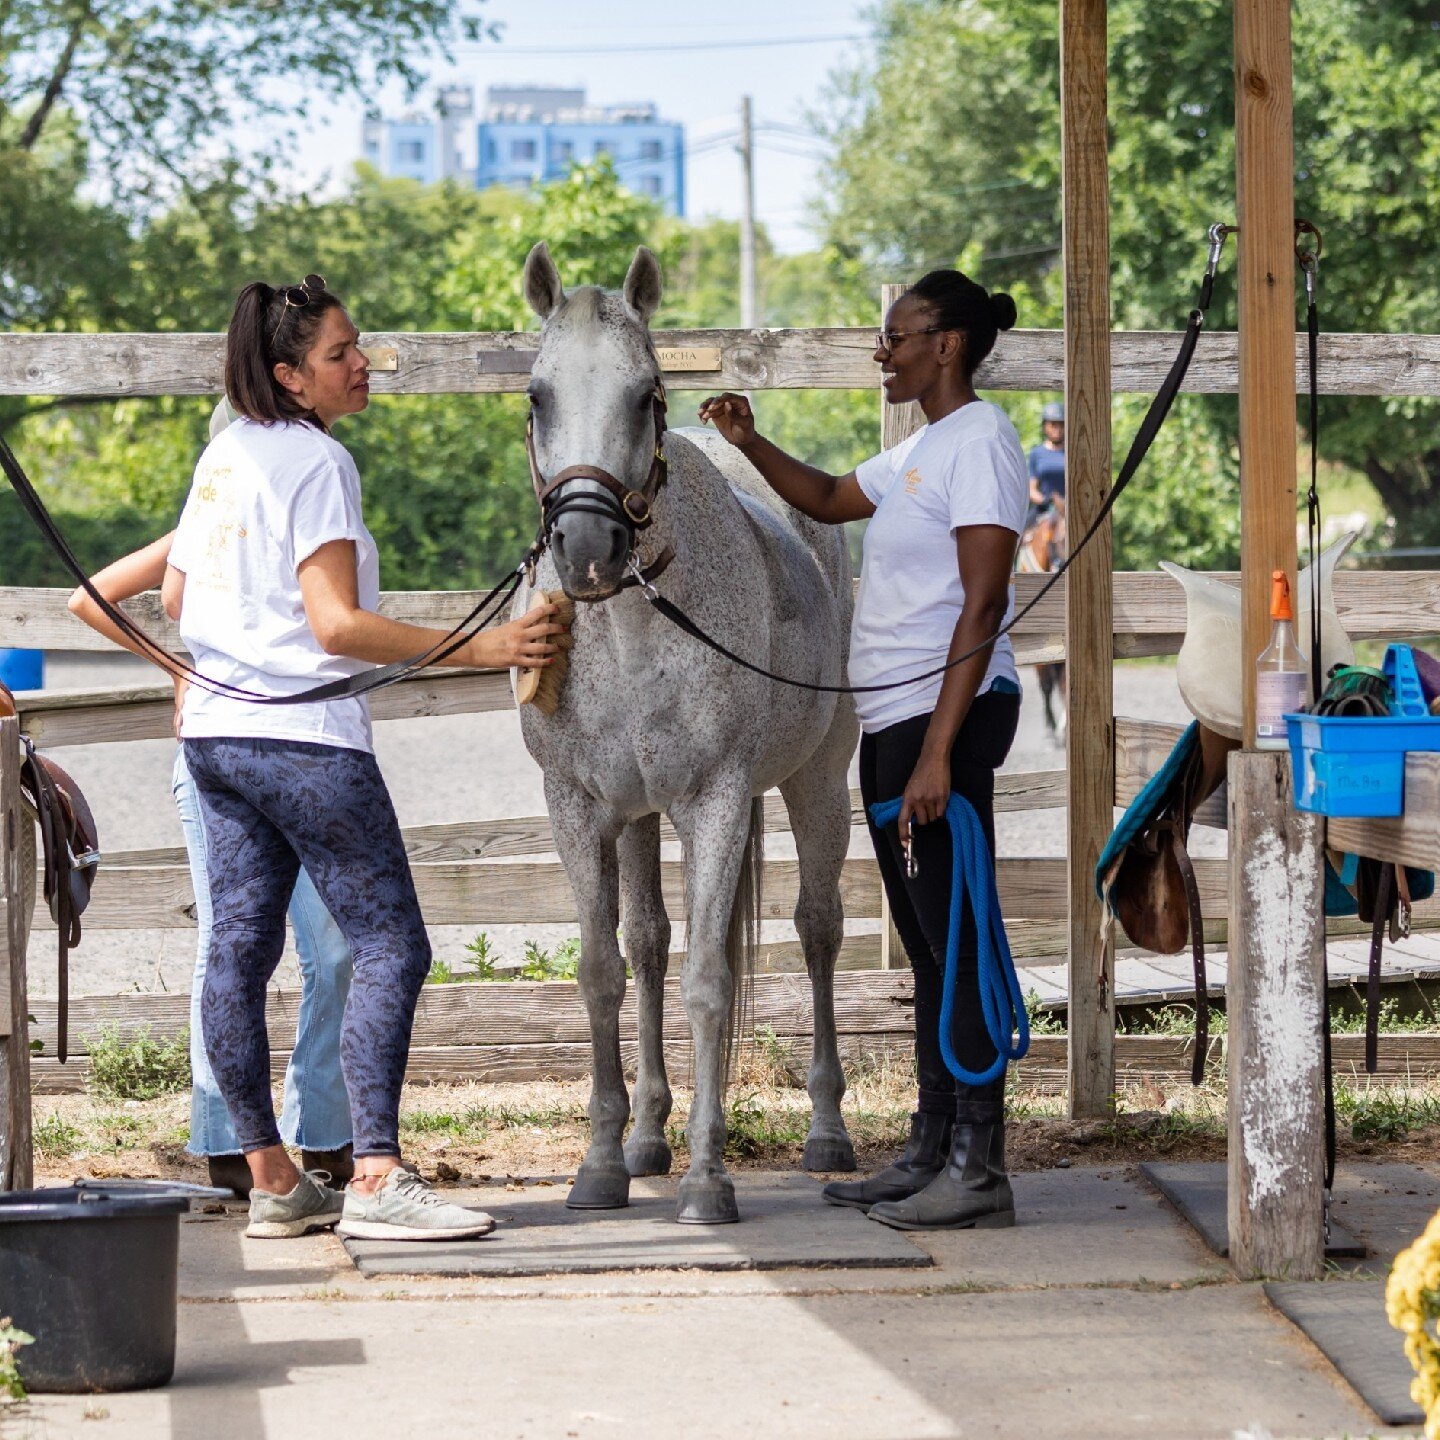 Thank you to the volunteers who give their time to show the GallopNYC horses some extra love! 
[Alt text: Two women brush and pat a grey horse in front of a fence.]

#gallopnyc #therapeutichorsemanship #believe inability #volunteerinnyc #gallopnycvol